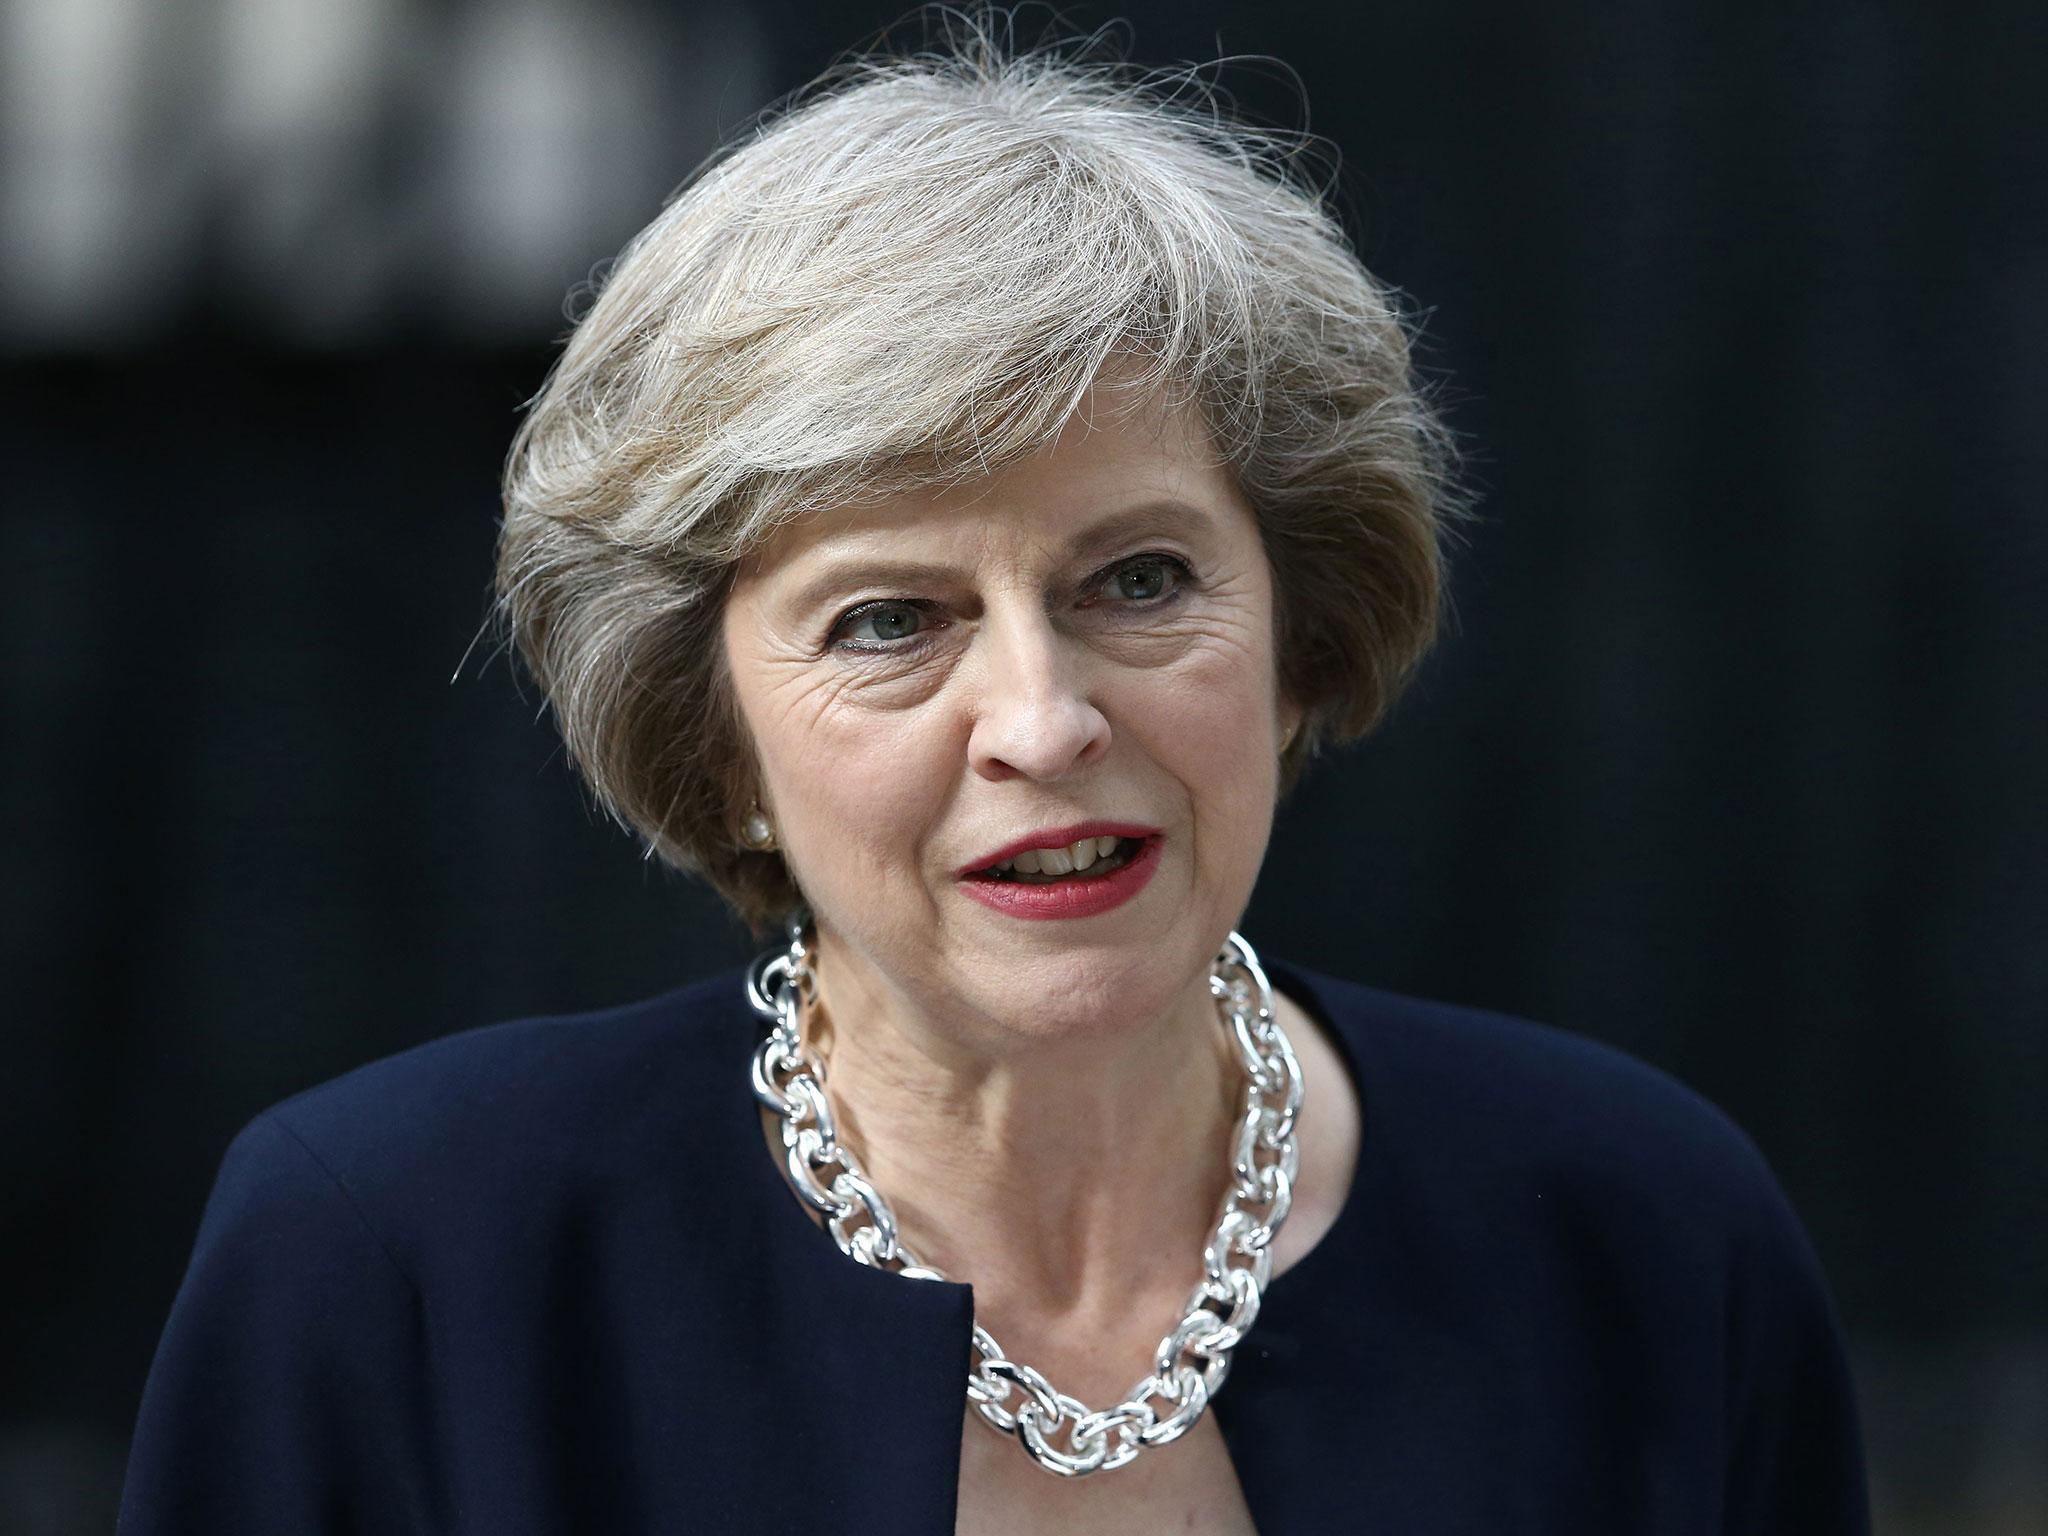 Prime Minister Theresa May's Government is to look at bribery and corruption laws